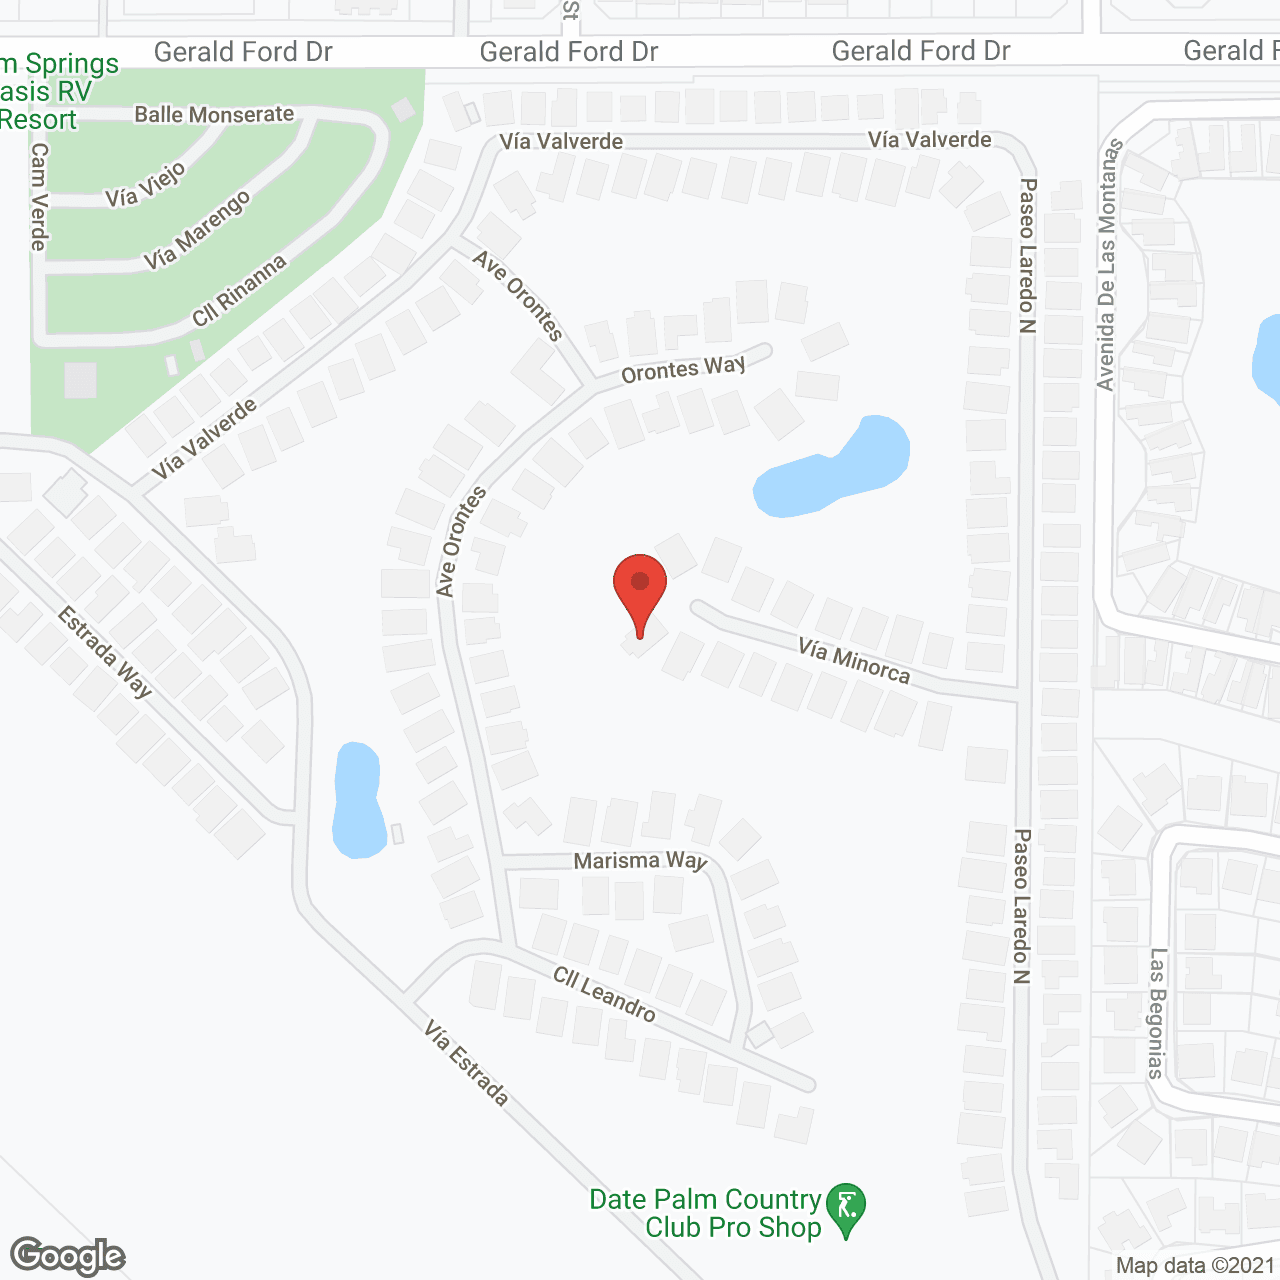 Date Palm Country Club in google map